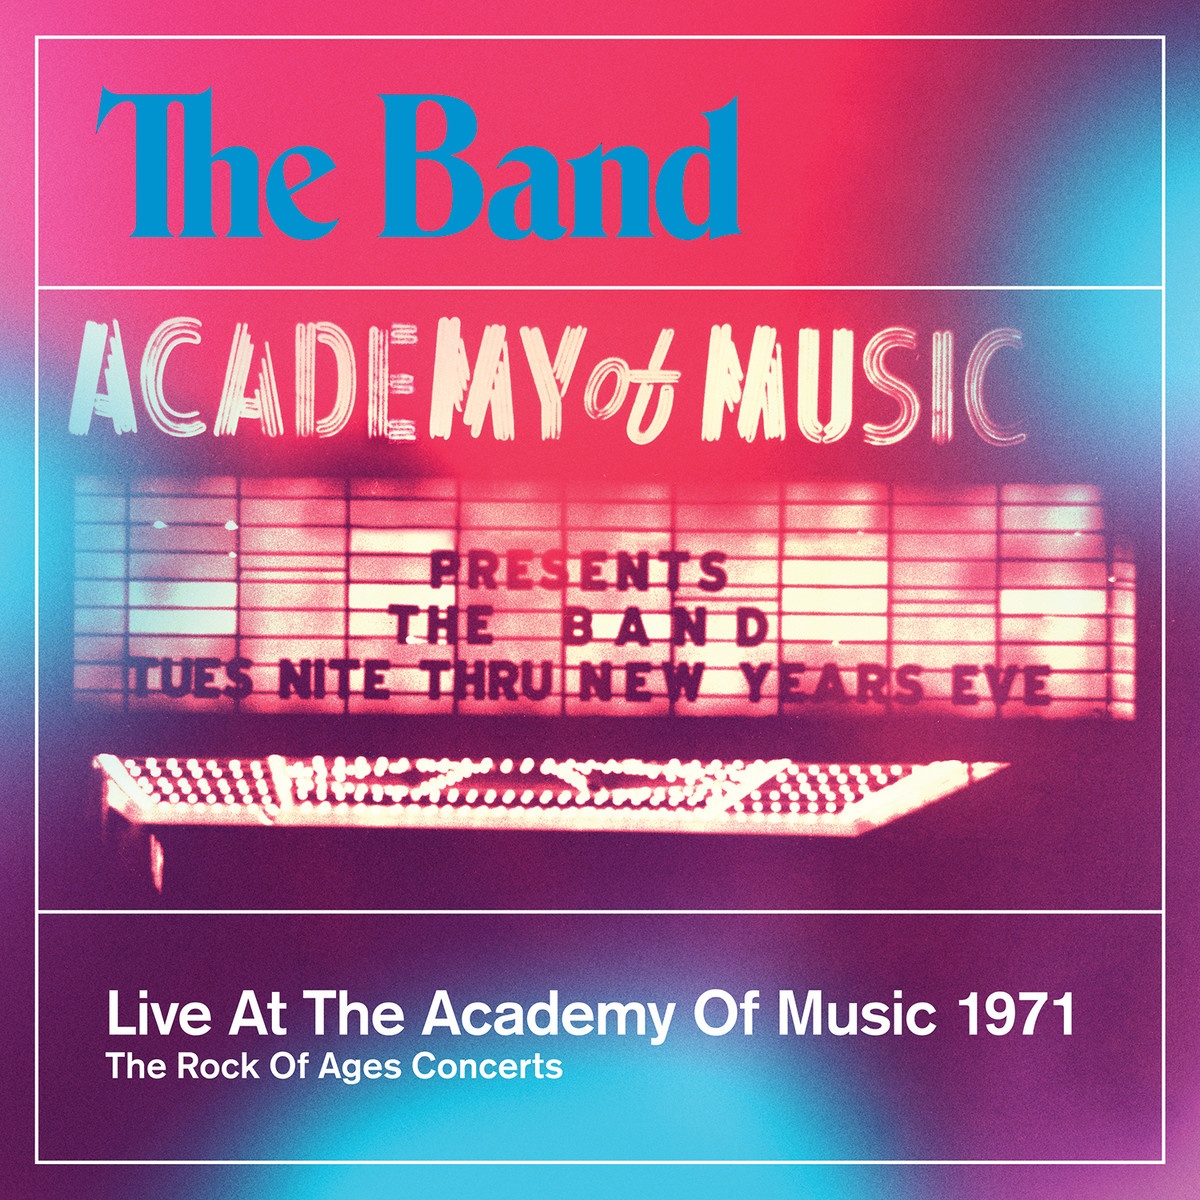 Across The Great Divide (Live At The Academy Of Music / 1971 / Soundboard Mix)